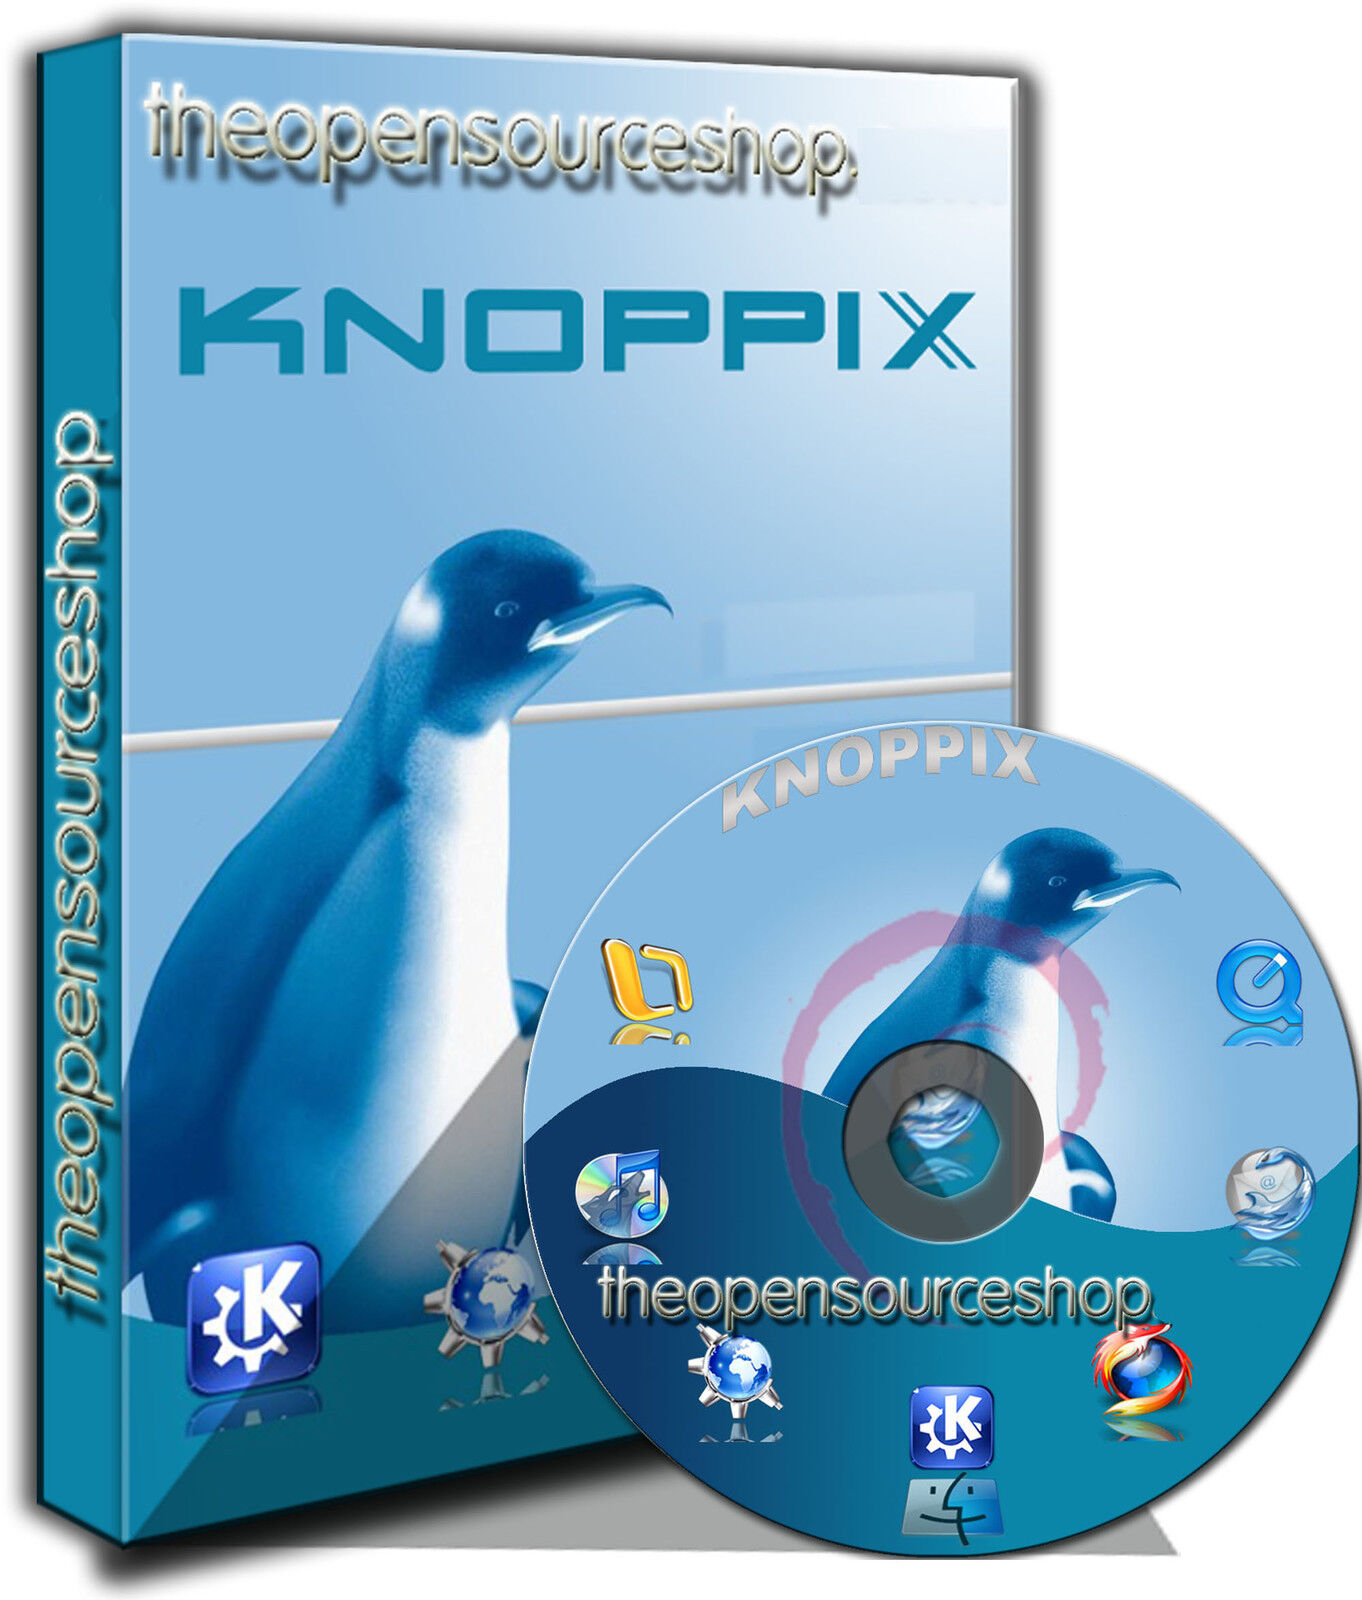 Knoppix 7.2.0 Live Linux Bootable Startup CD (Runs form CD) +Free Retro Linux CD